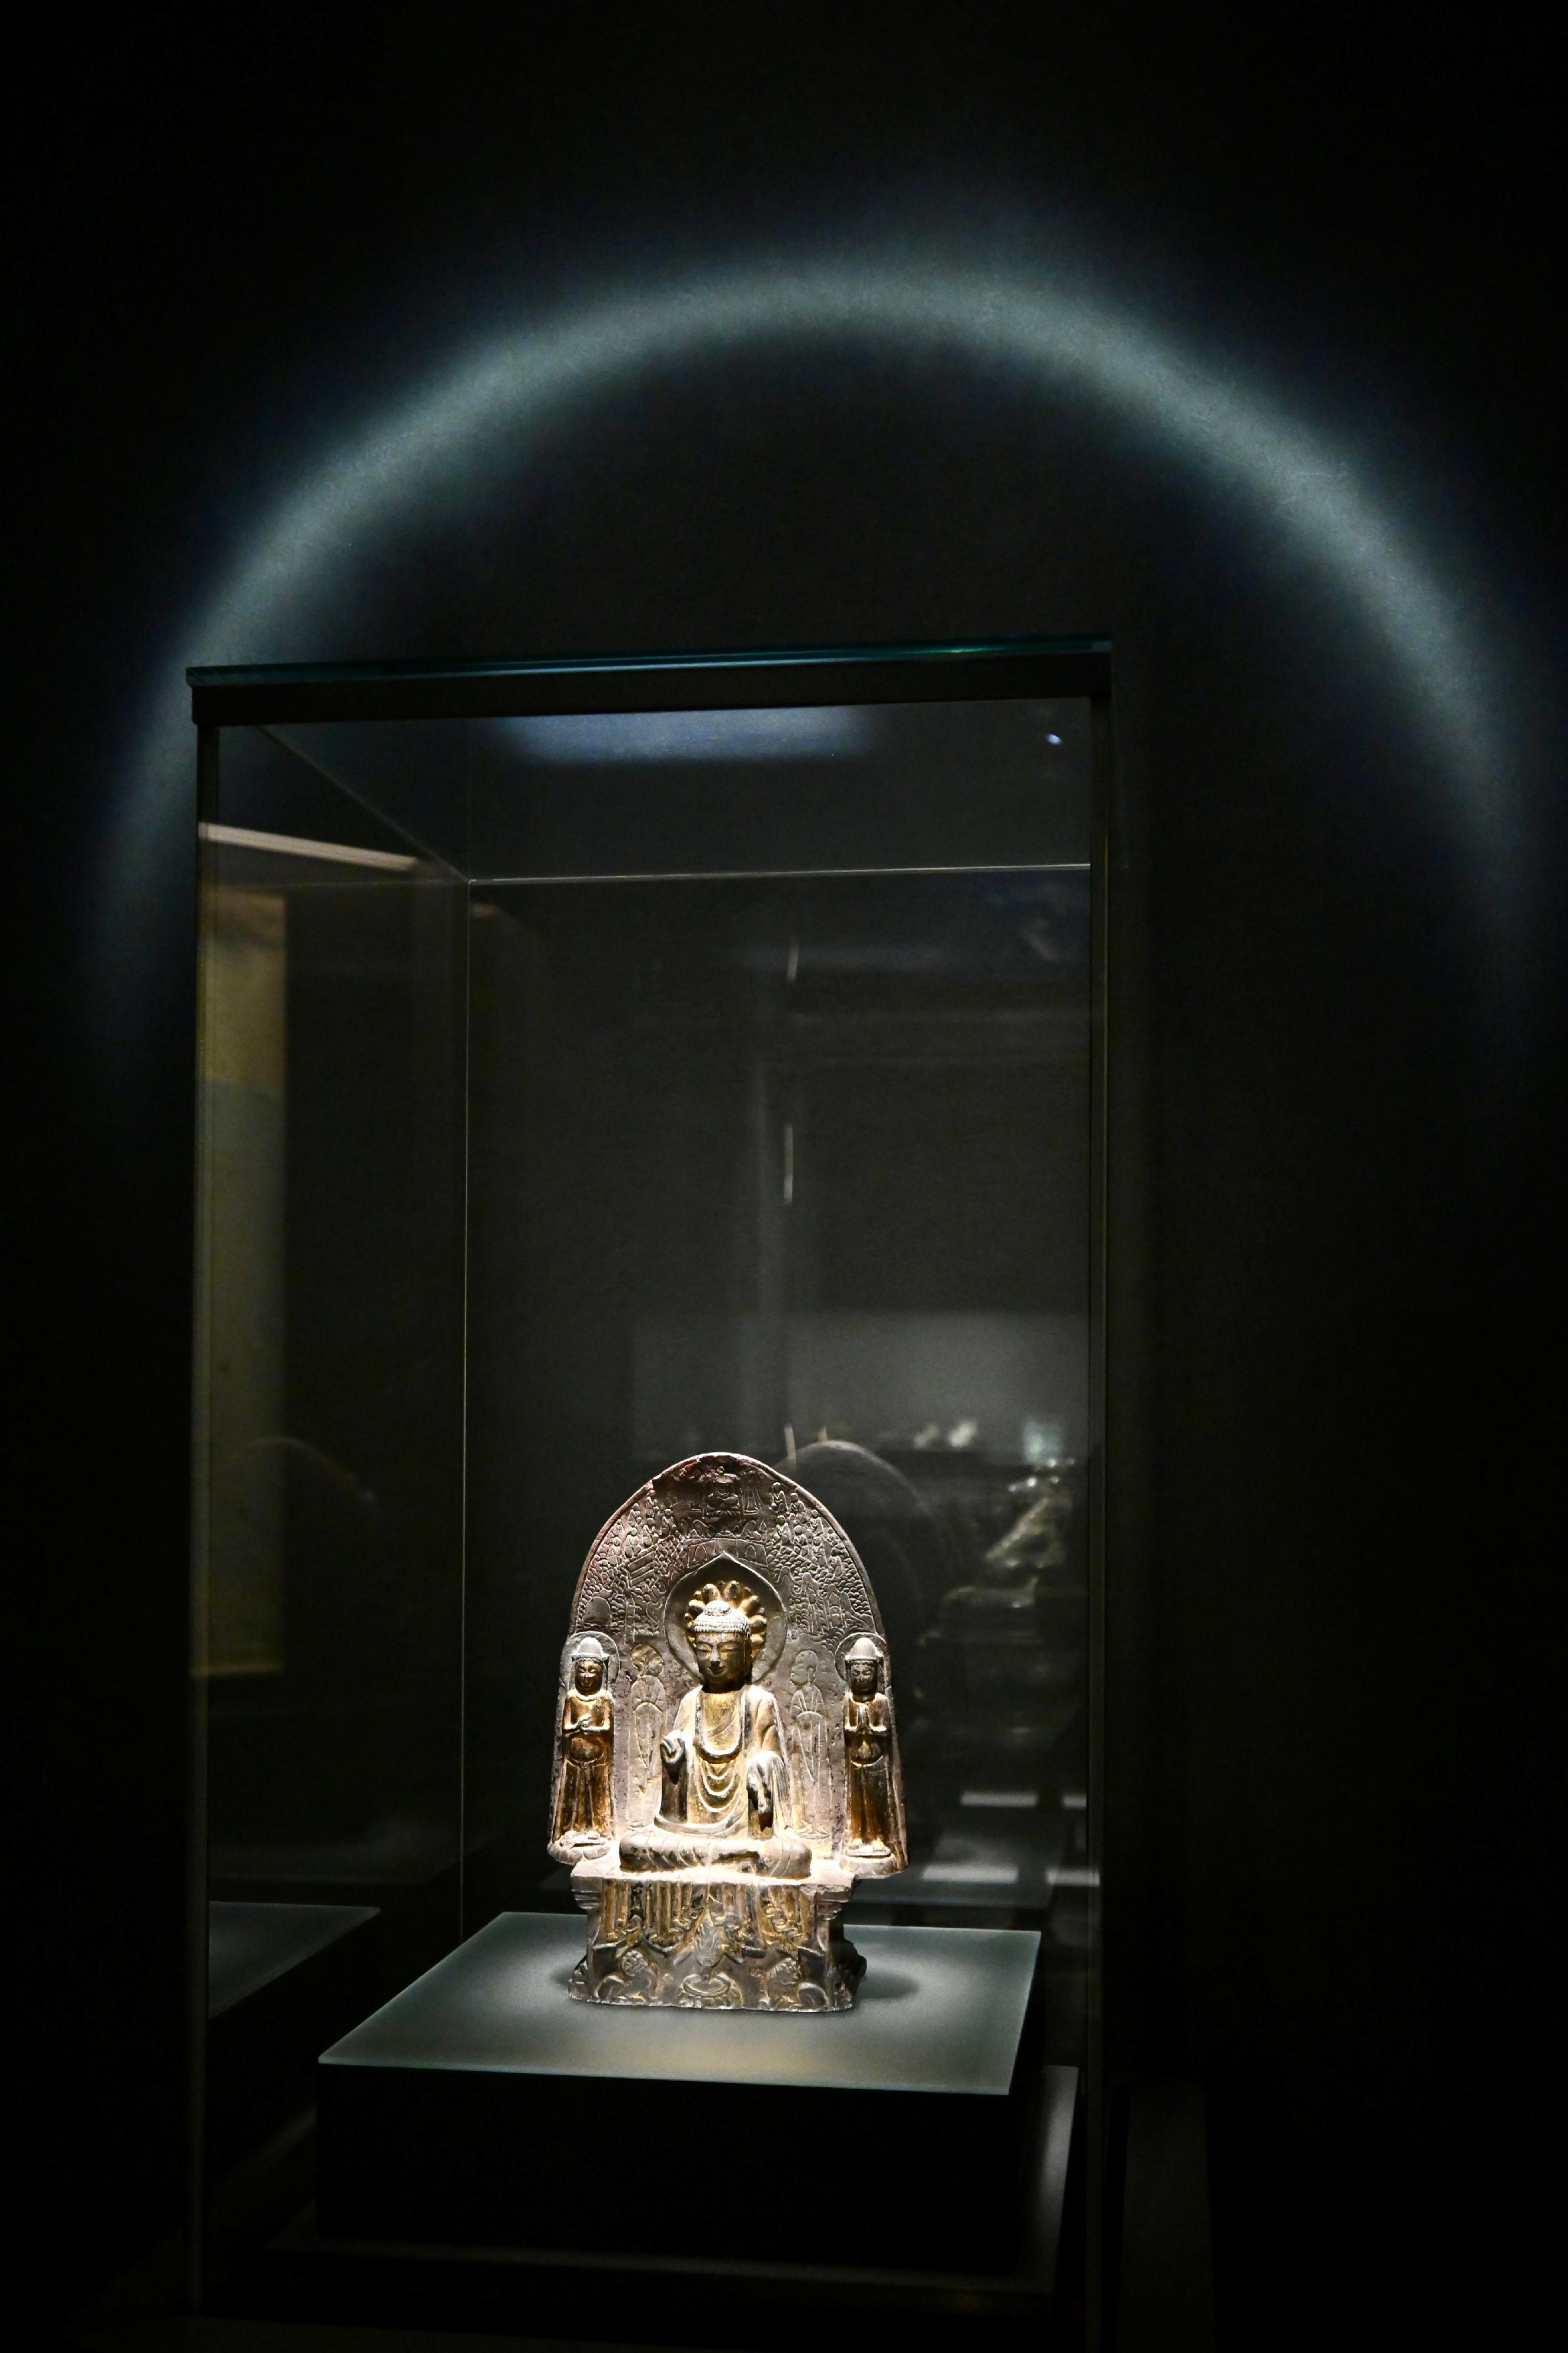 The opening ceremony of the "The Hong Kong Jockey Club Series: Fragrance of Time - In Search of Chinese Art of Scent" exhibition was held today (June 27) at the Hong Kong Museum of Art. Photo shows a gold-painted stone Sakyamuni Buddha from the Southern Liang dynasty, which is a Grade-1 national treasure from the Shanghai Museum collection, dedicated by Shi Huiying.